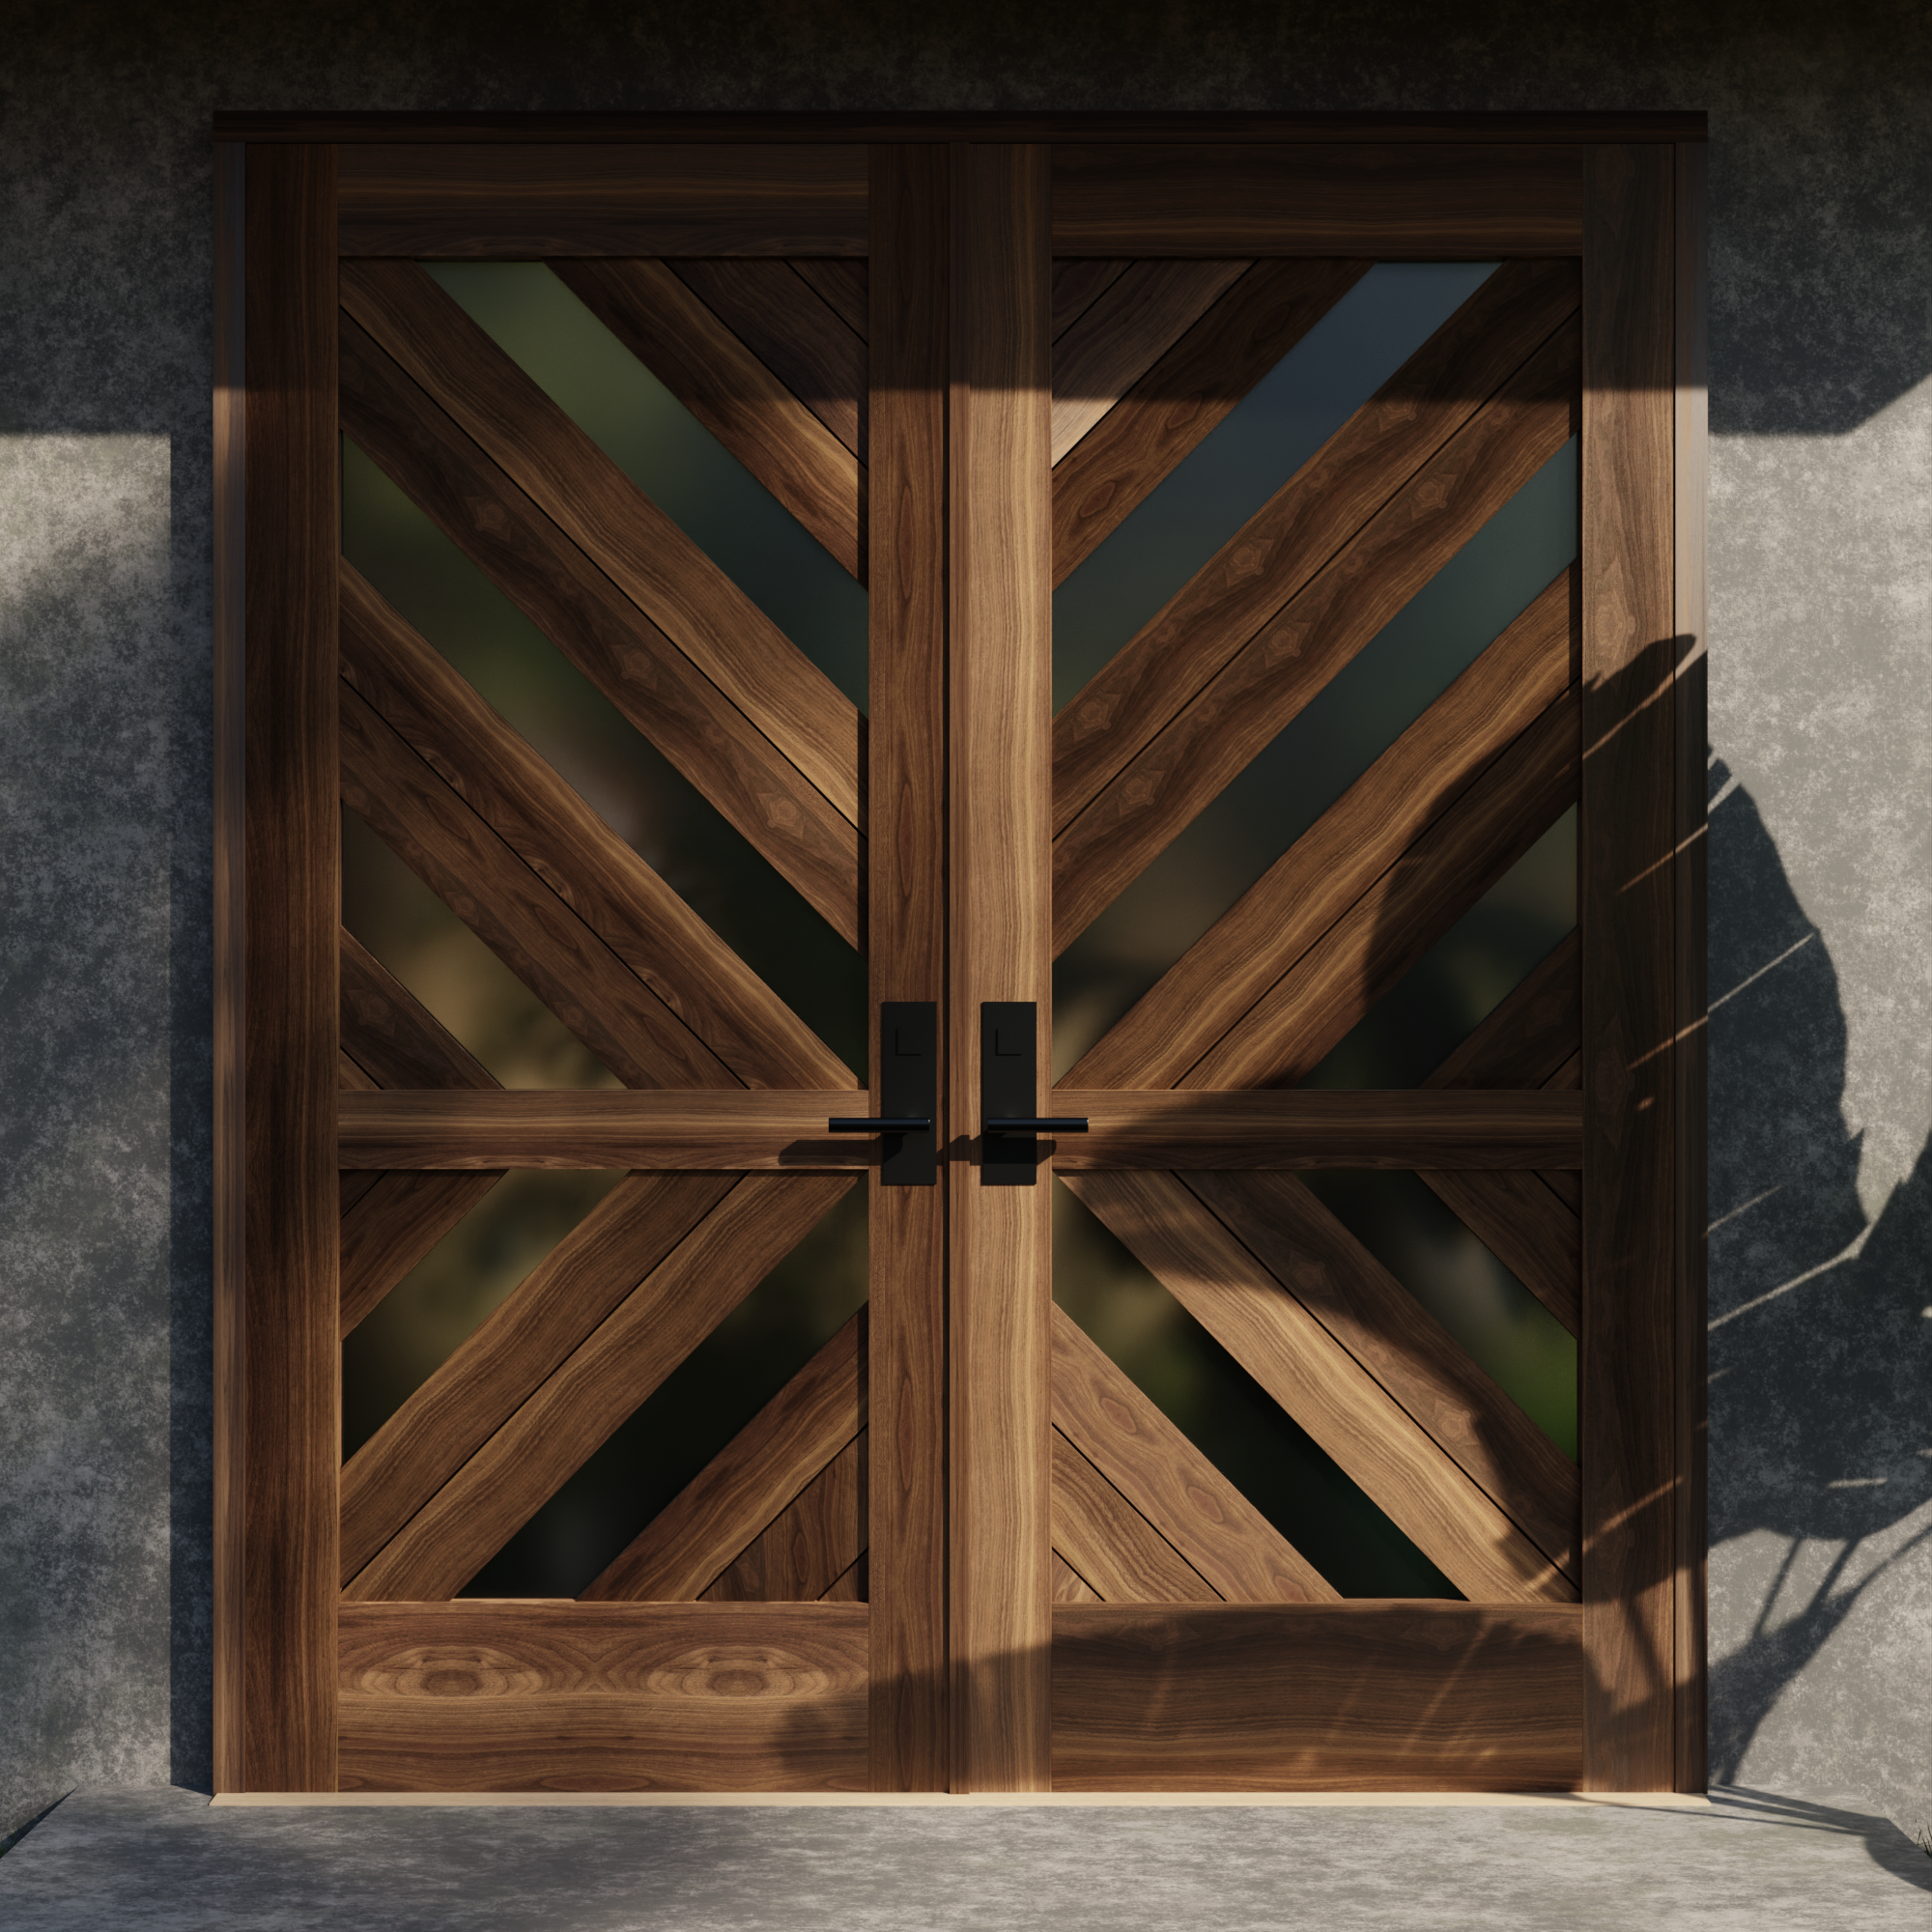 Introducing: Double Doors From RealCraft!